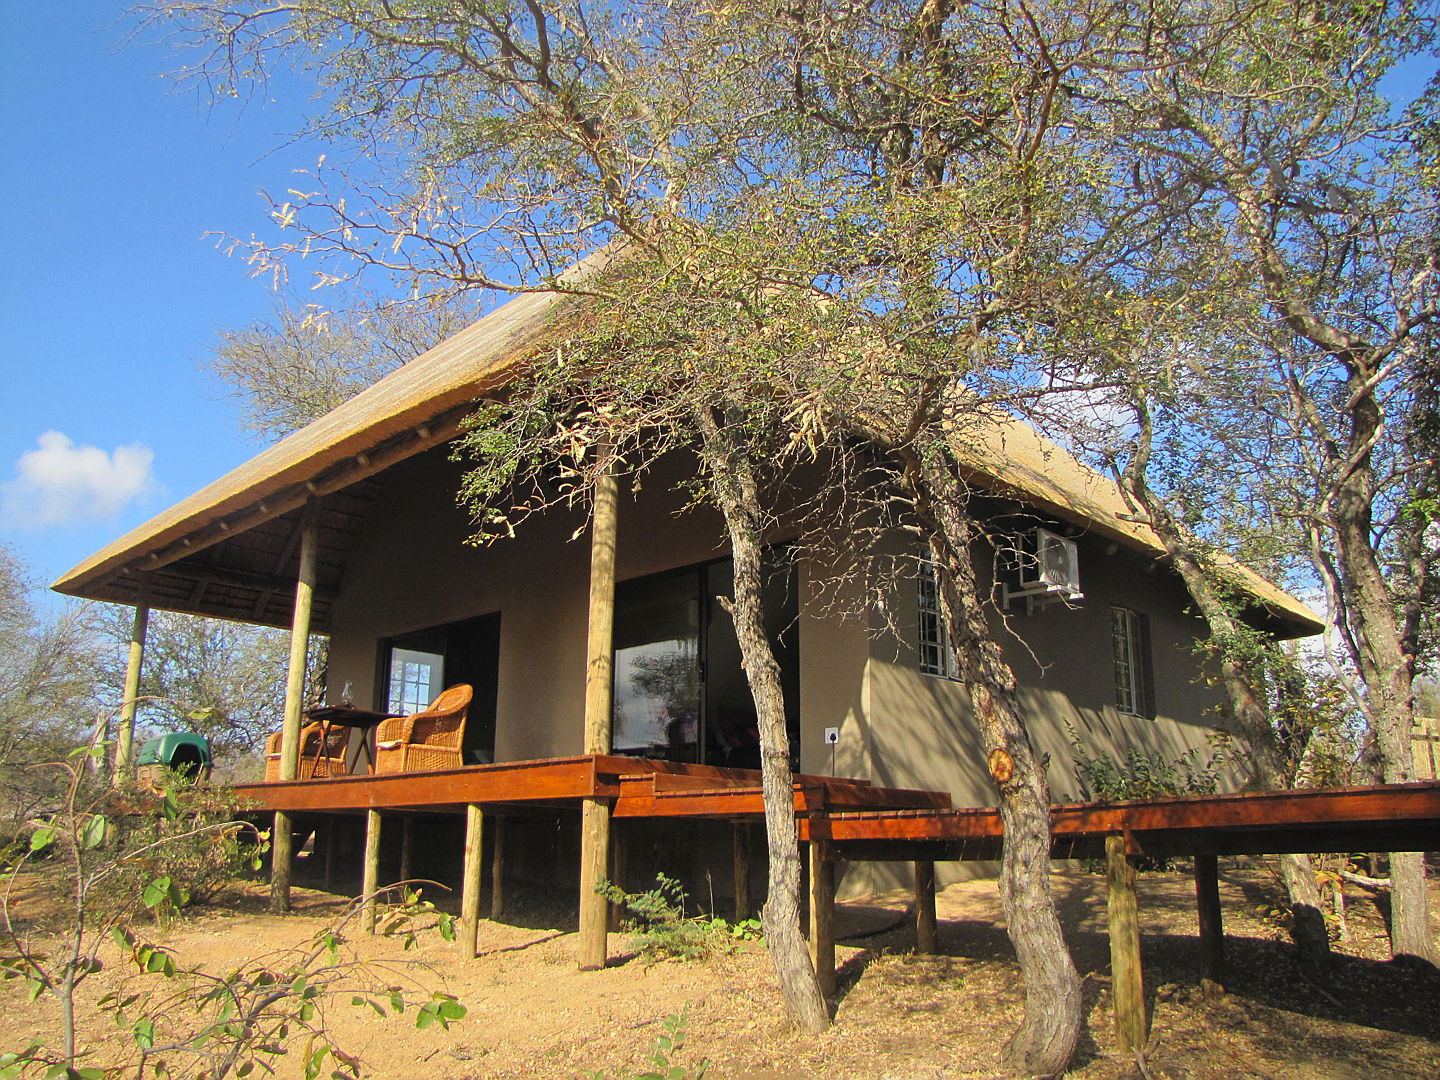  Hoedspruit
- Balule West property, image of main house with 2 bedrooms 2 bathrooms